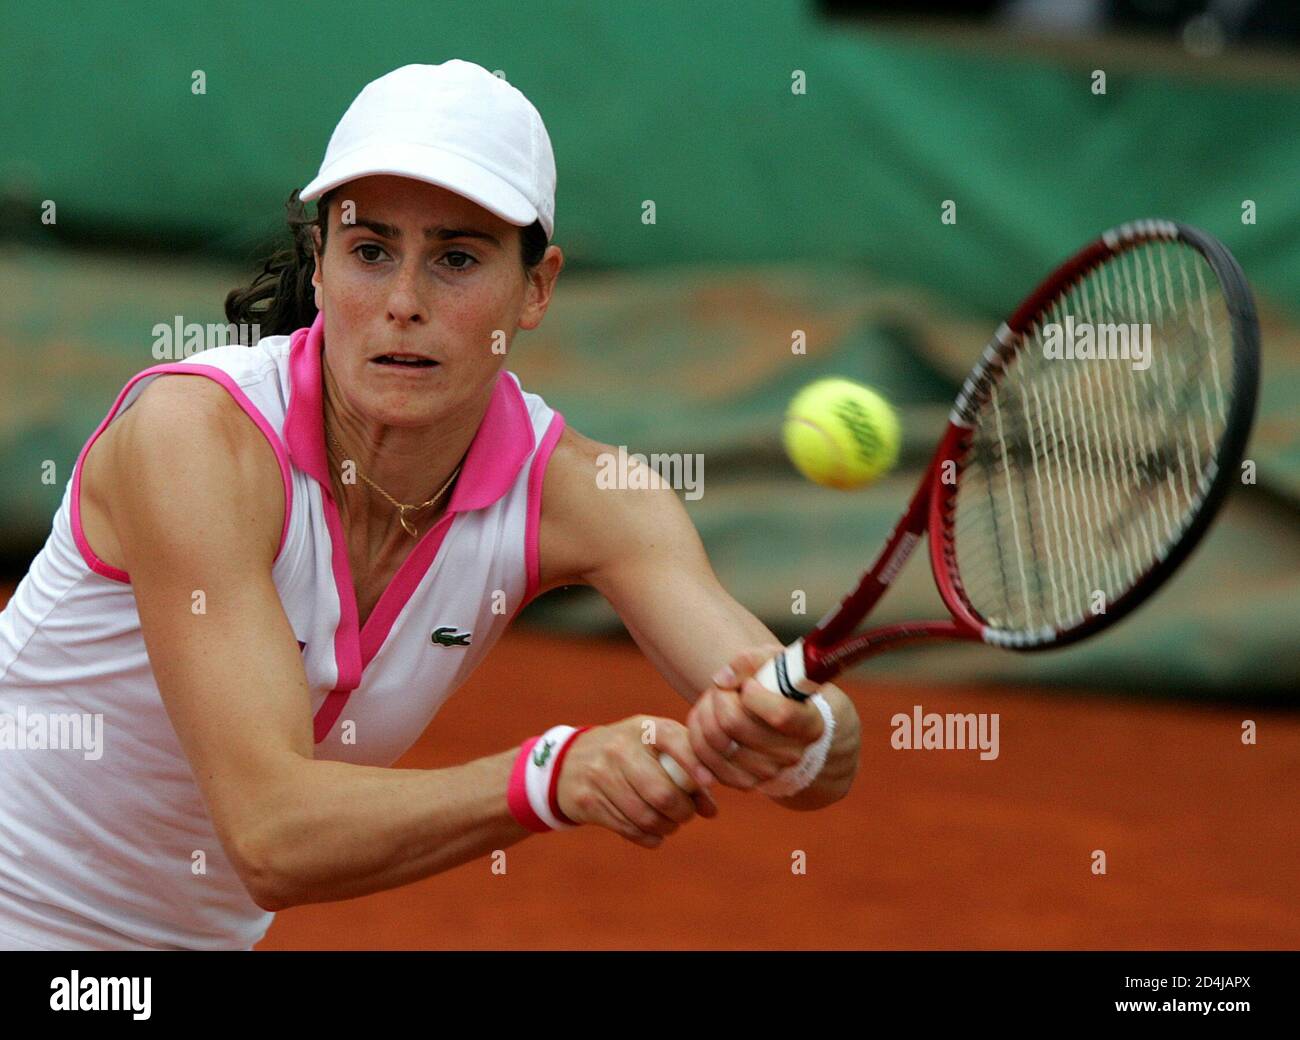 France's Nathalie Dechy returns a backhand during her match against [Czech  Republic's Michaela Pastikova in the first round of the French Open tennis  tournament at Roland Garros stadium May 24, 2005. [Dechy